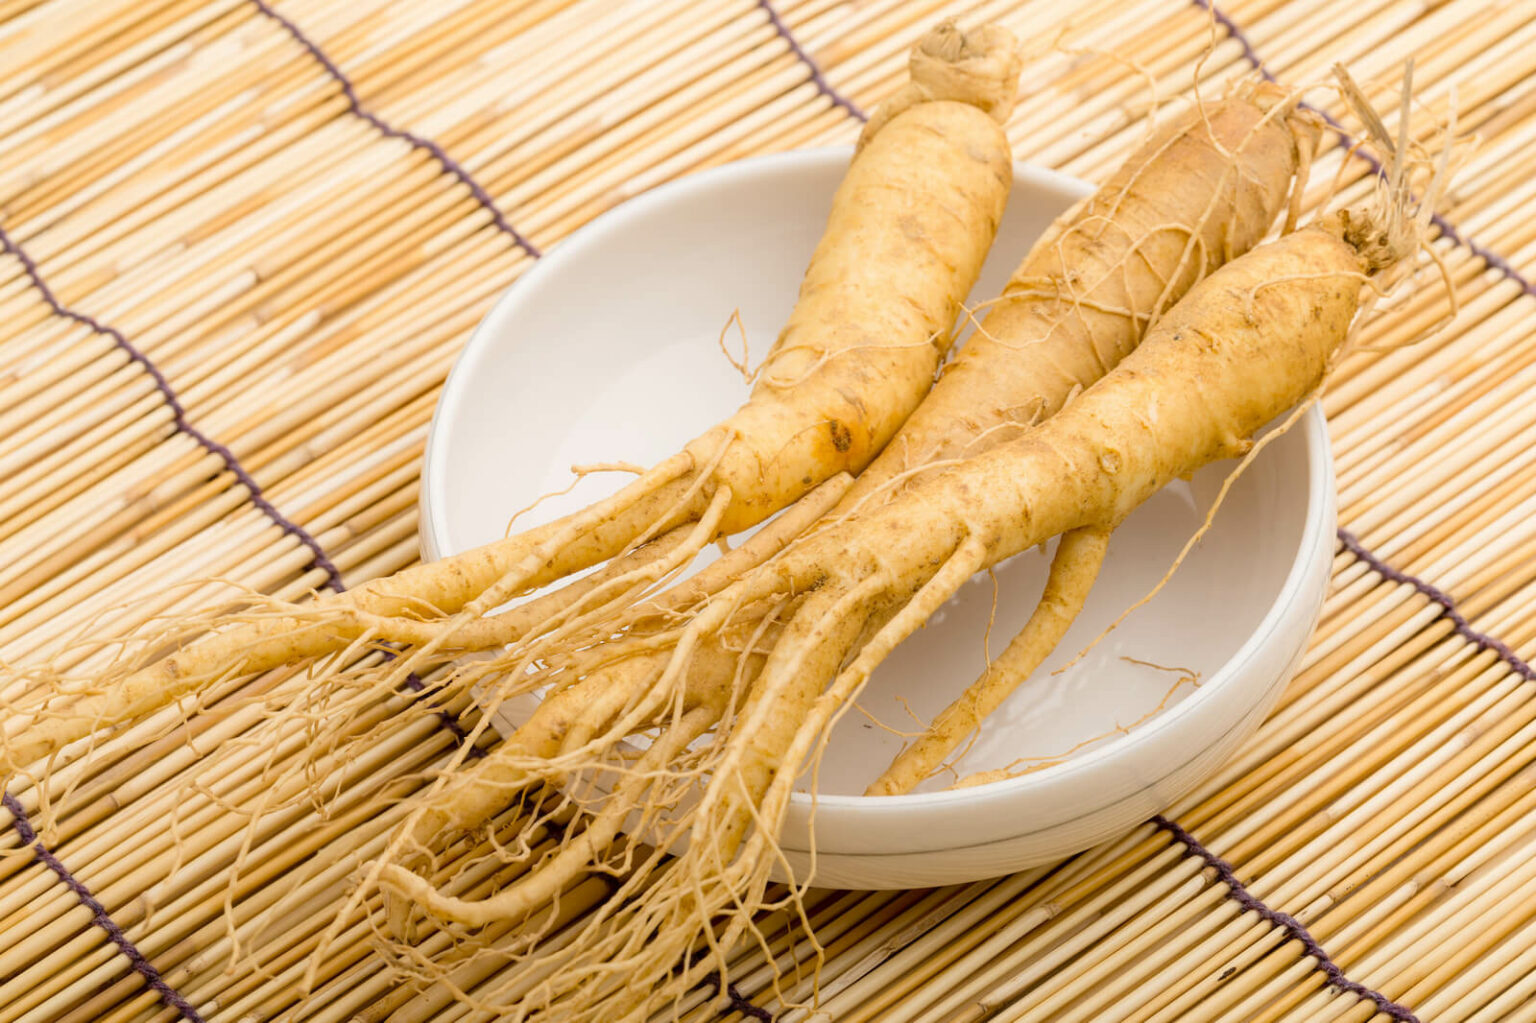 Ginseng has advantages as well as disadvantages